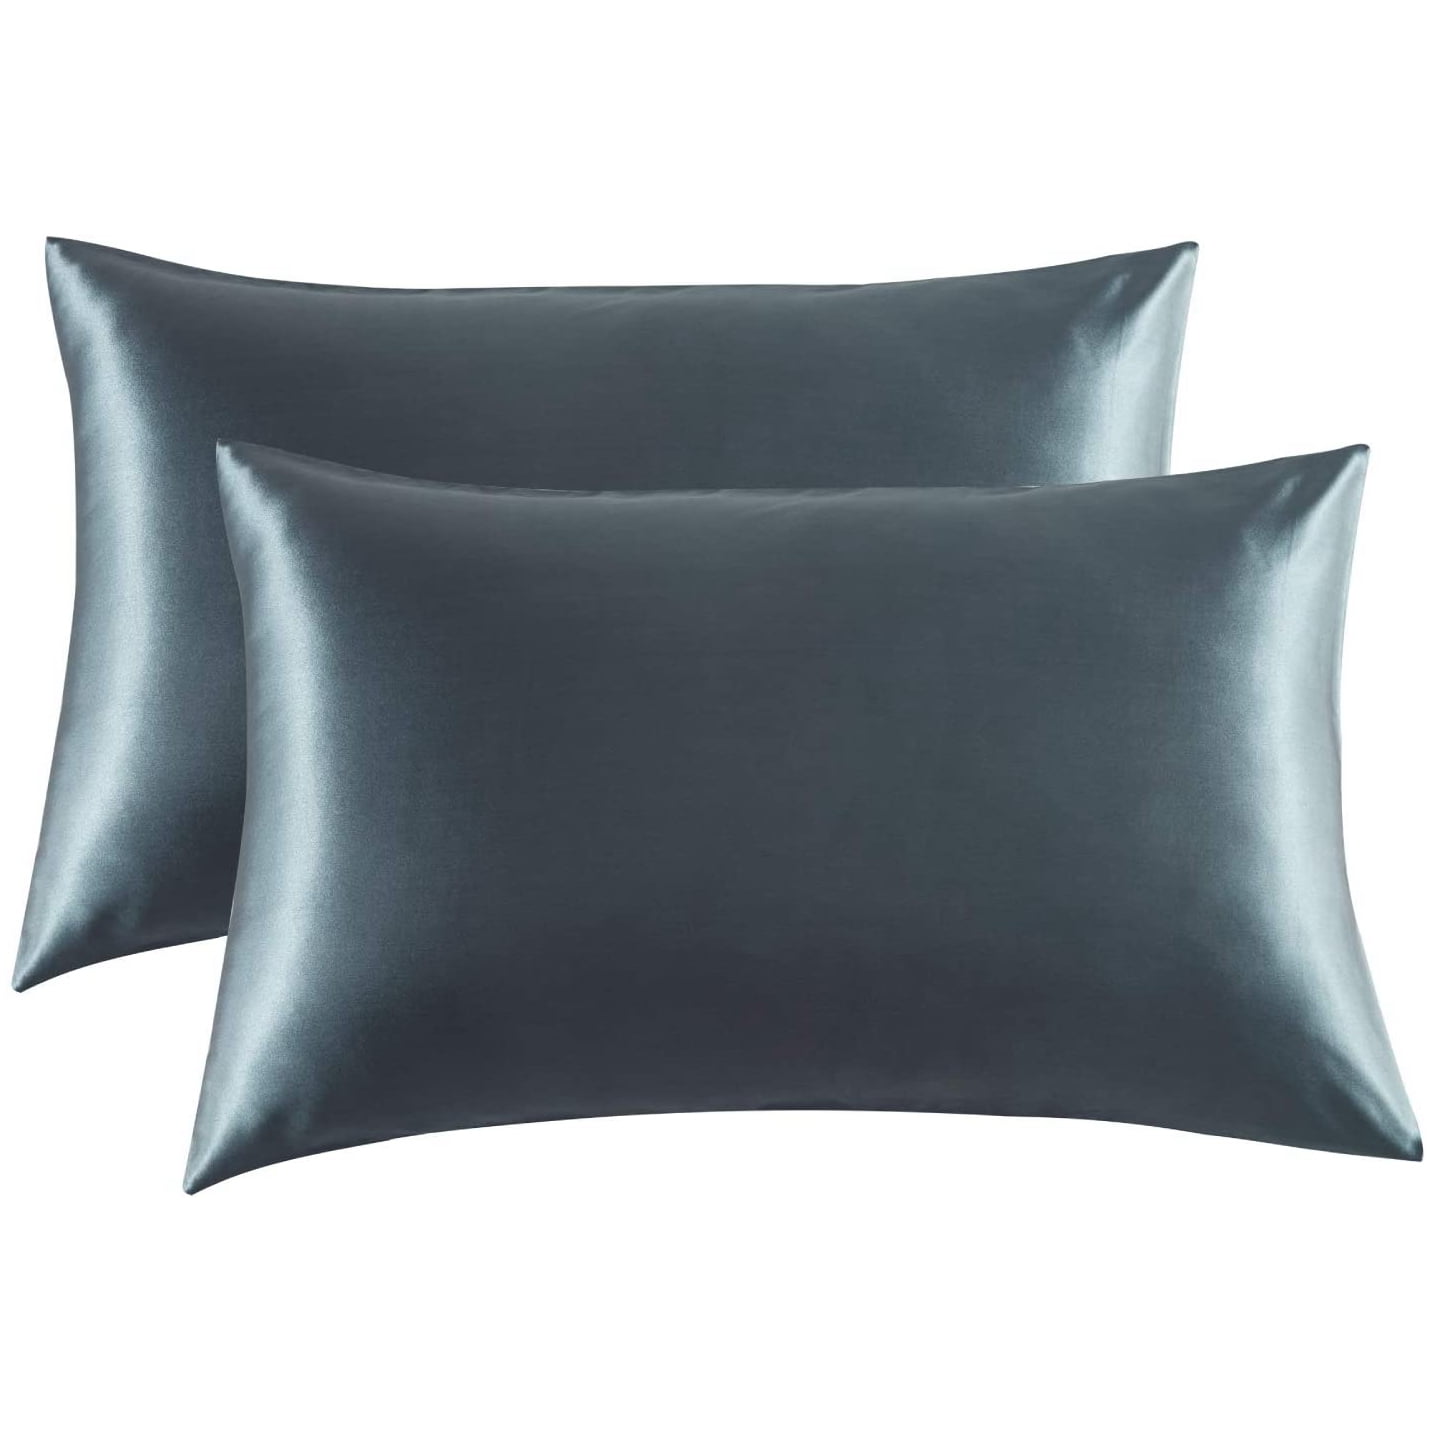 Bedsure Satin Pillowcase for Hair and Skin Standard Size 20x26 inches 2-Pack 